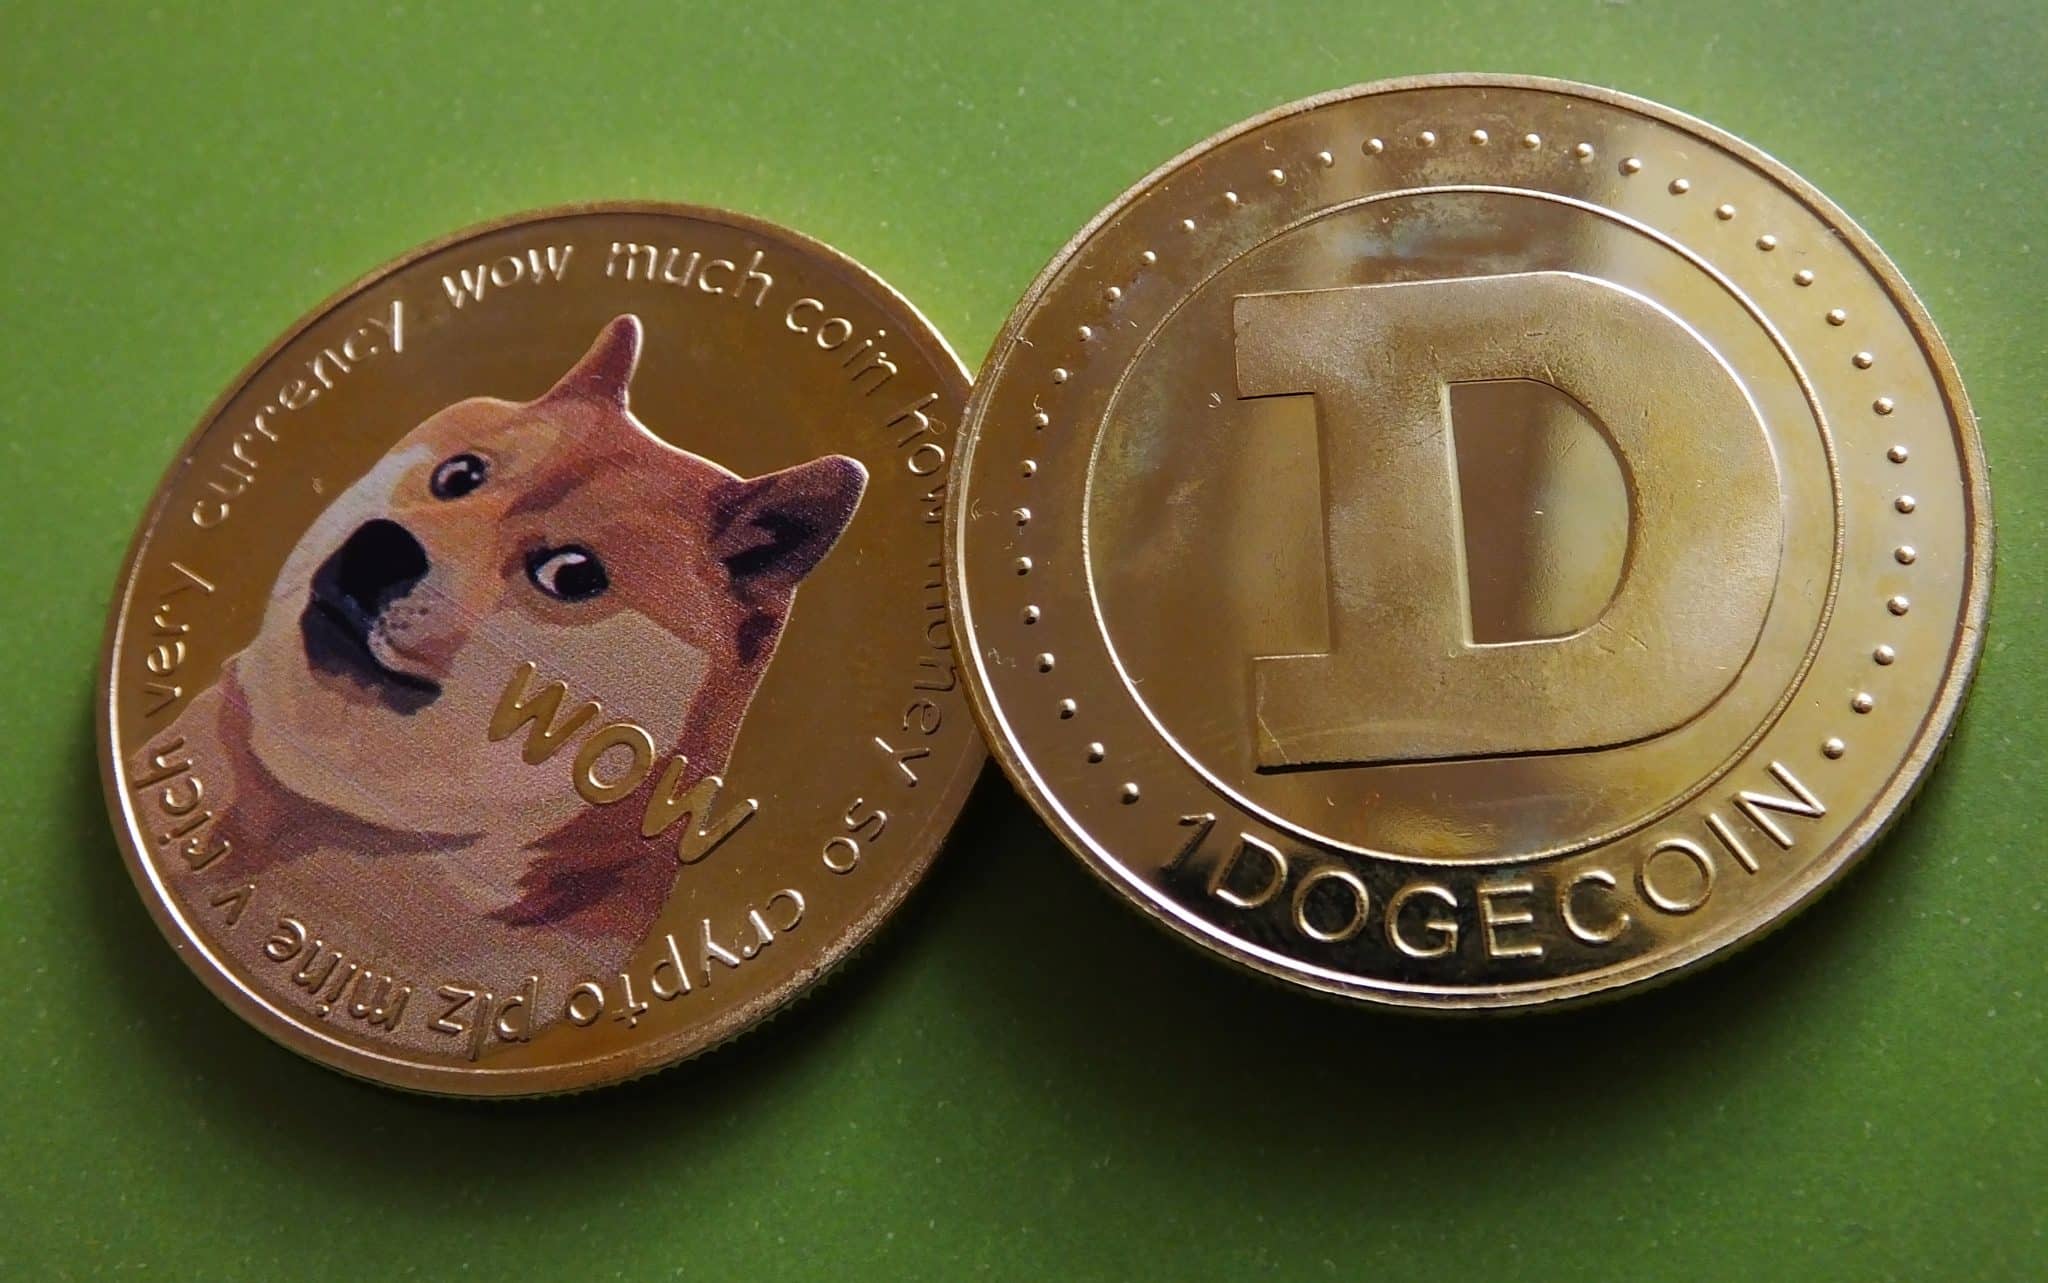 Dogecoin Price Prediction: Can DOGE Continue to Stay Below $0.1?